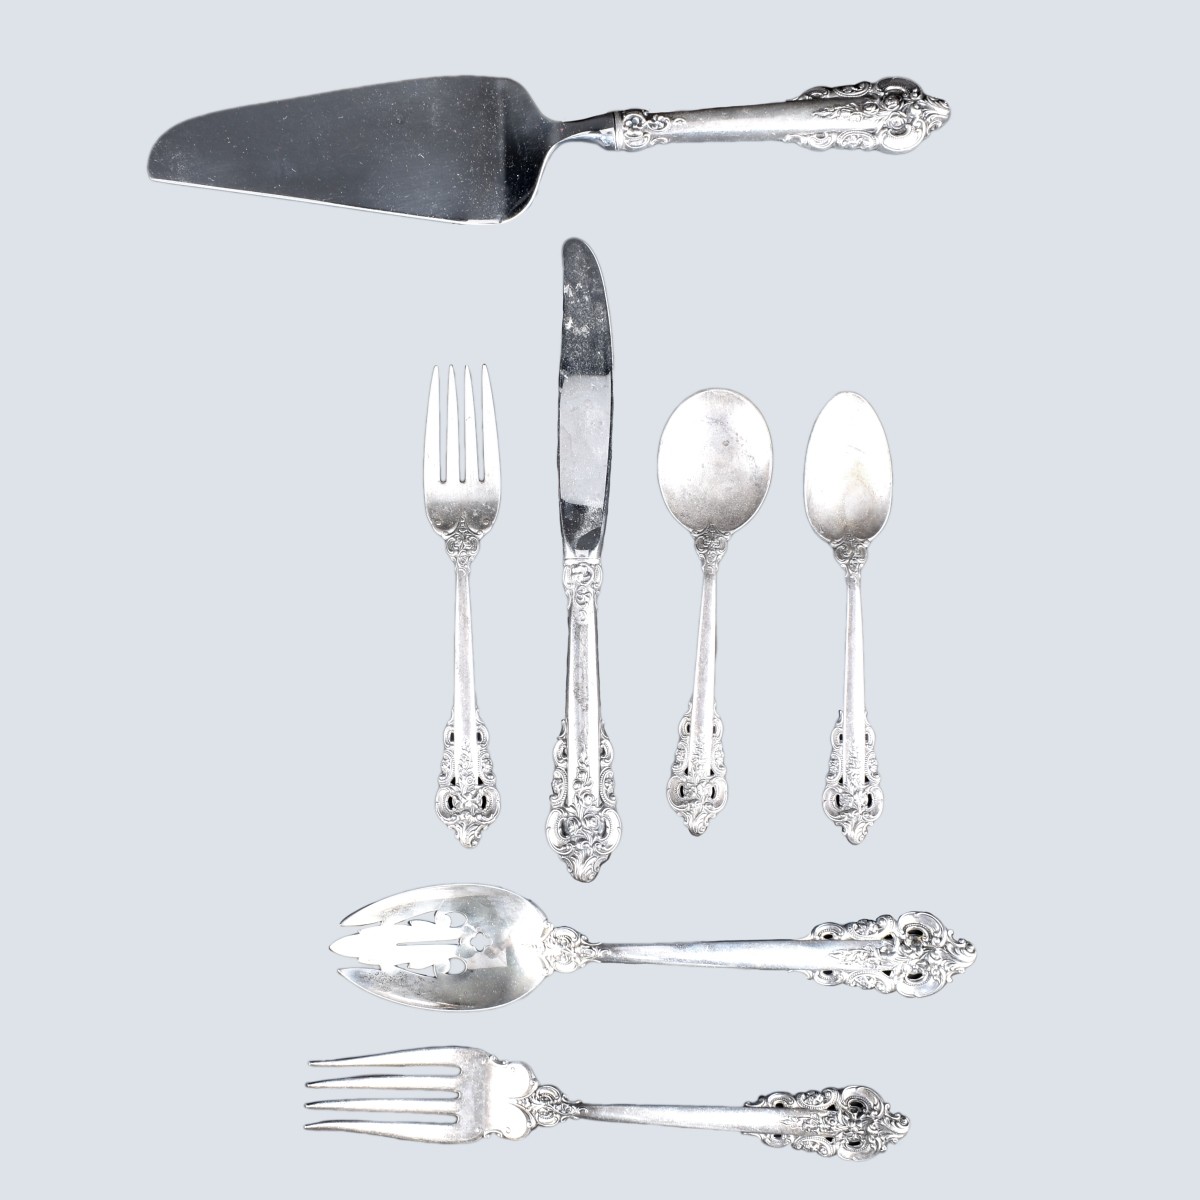 61 Wallace Grand Baroque Sterling Flatware Set